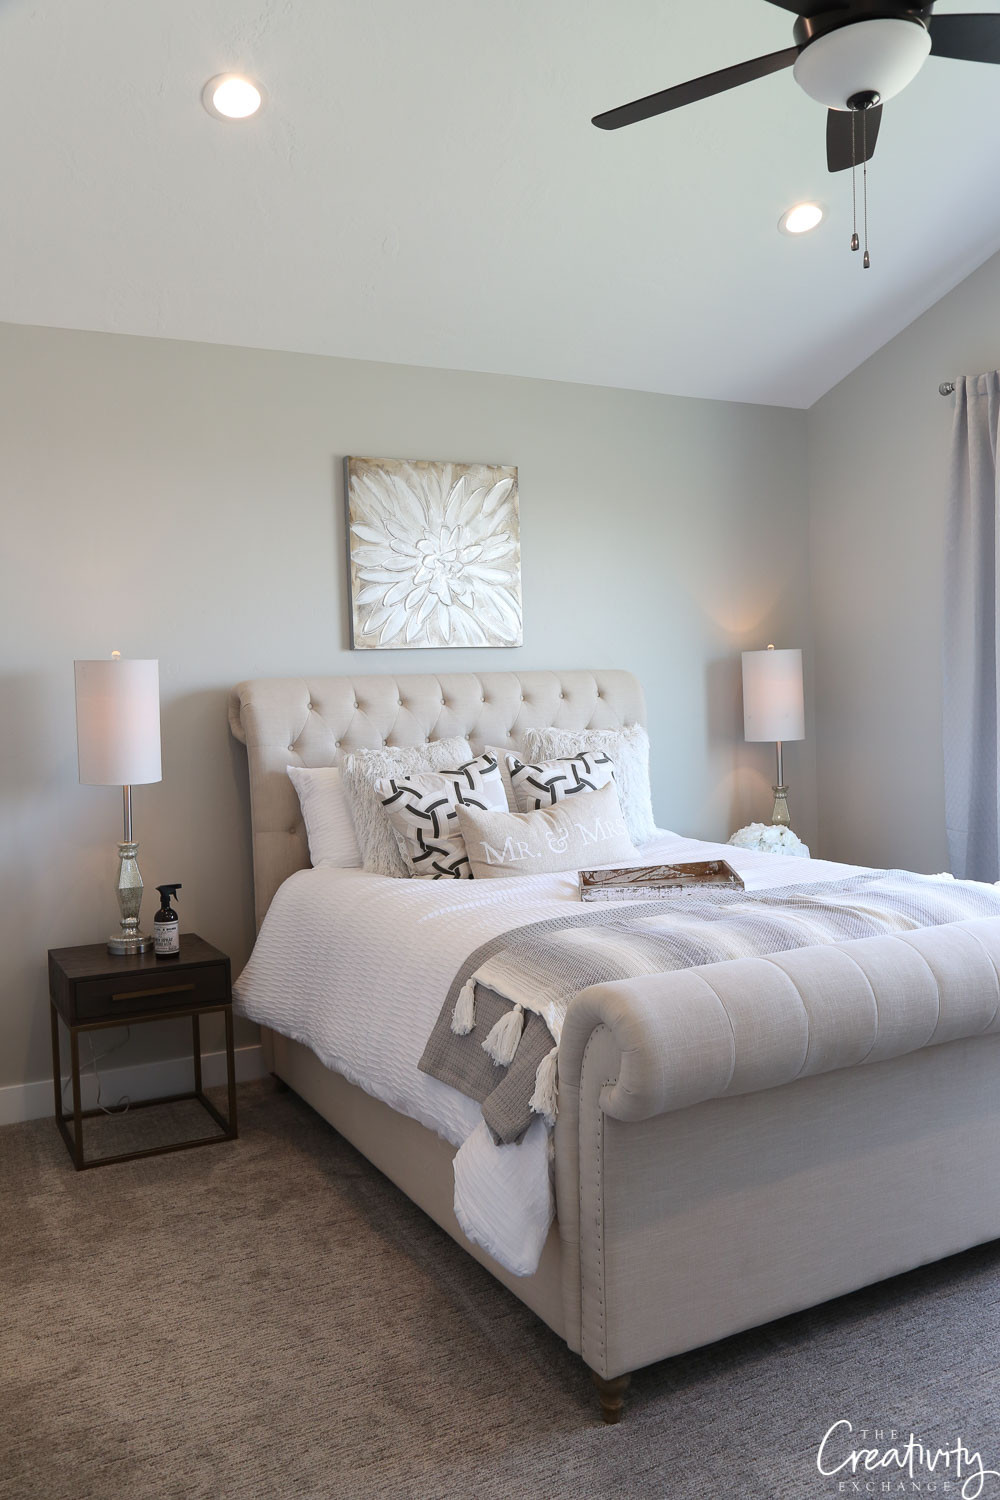 Popular Bedroom Colors 2020
 2019 Paint Color Trends and Forecasts